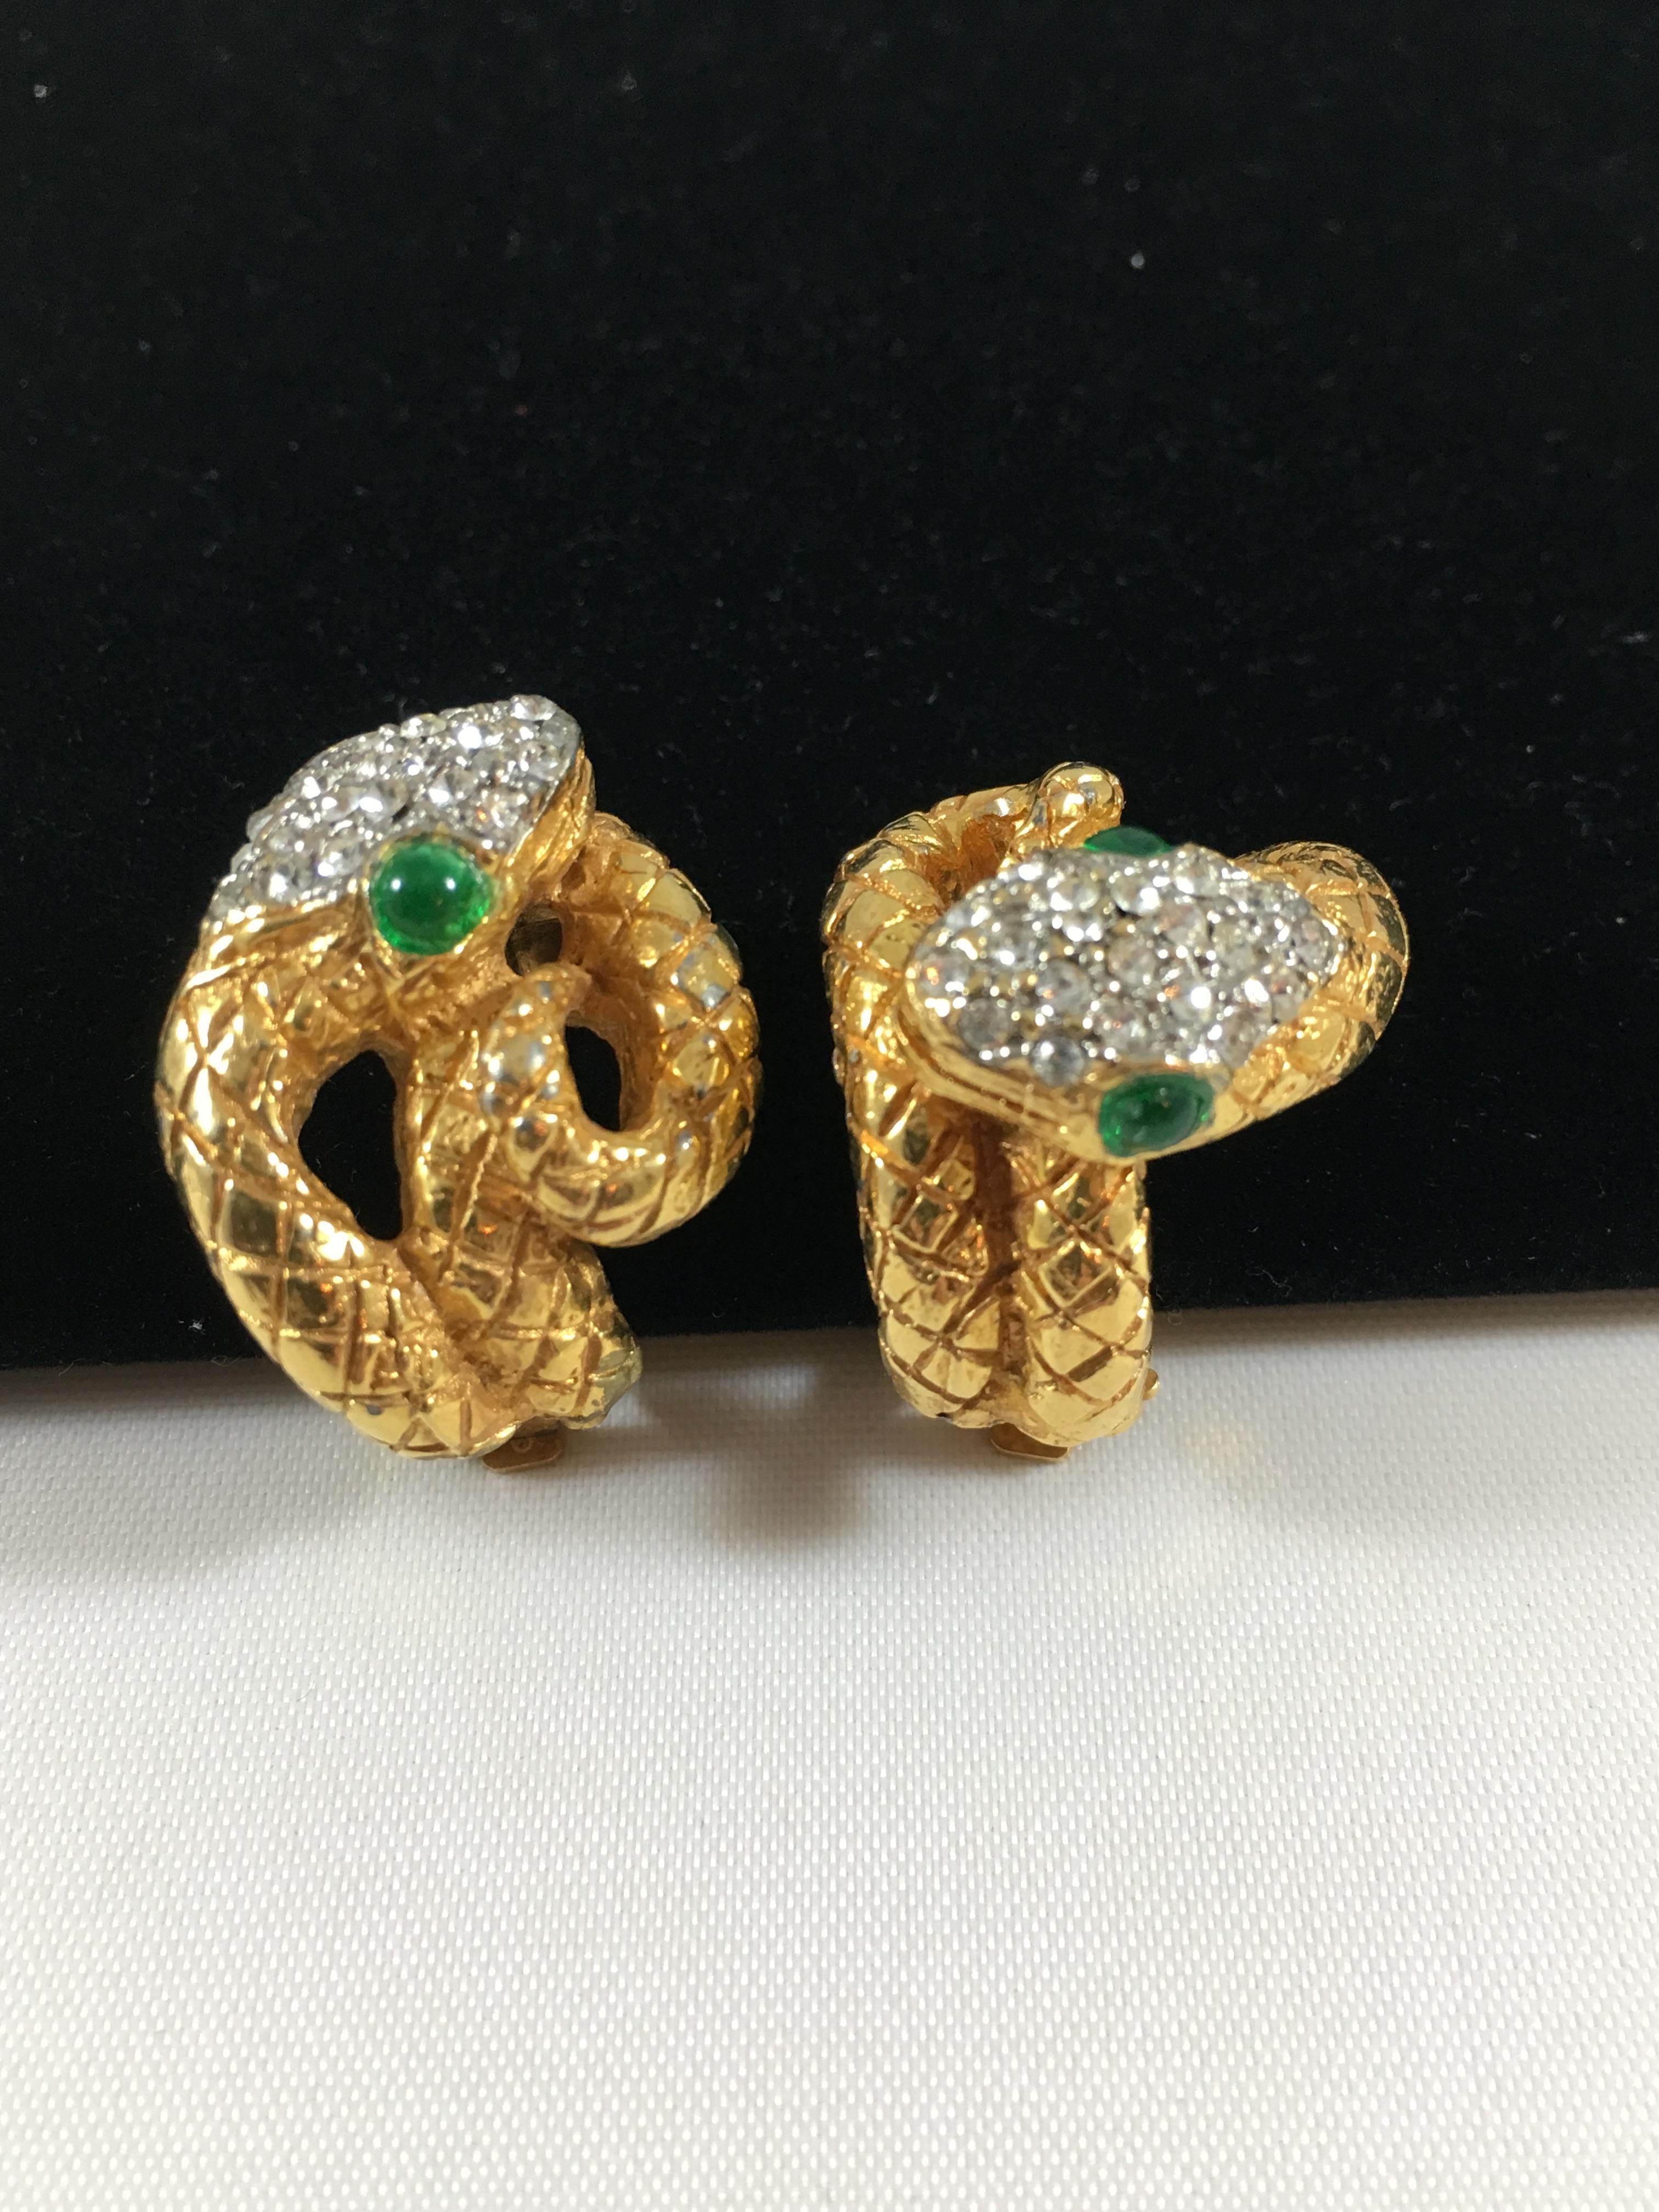 This is a gorgeous pair of 1960s Kenneth Jay Lane snake clip-on earrings. Each earring is different from the other. They are made so that both of the snakes' faces face inward towards the wearer. The snakes are gold-toned and set with clear pave